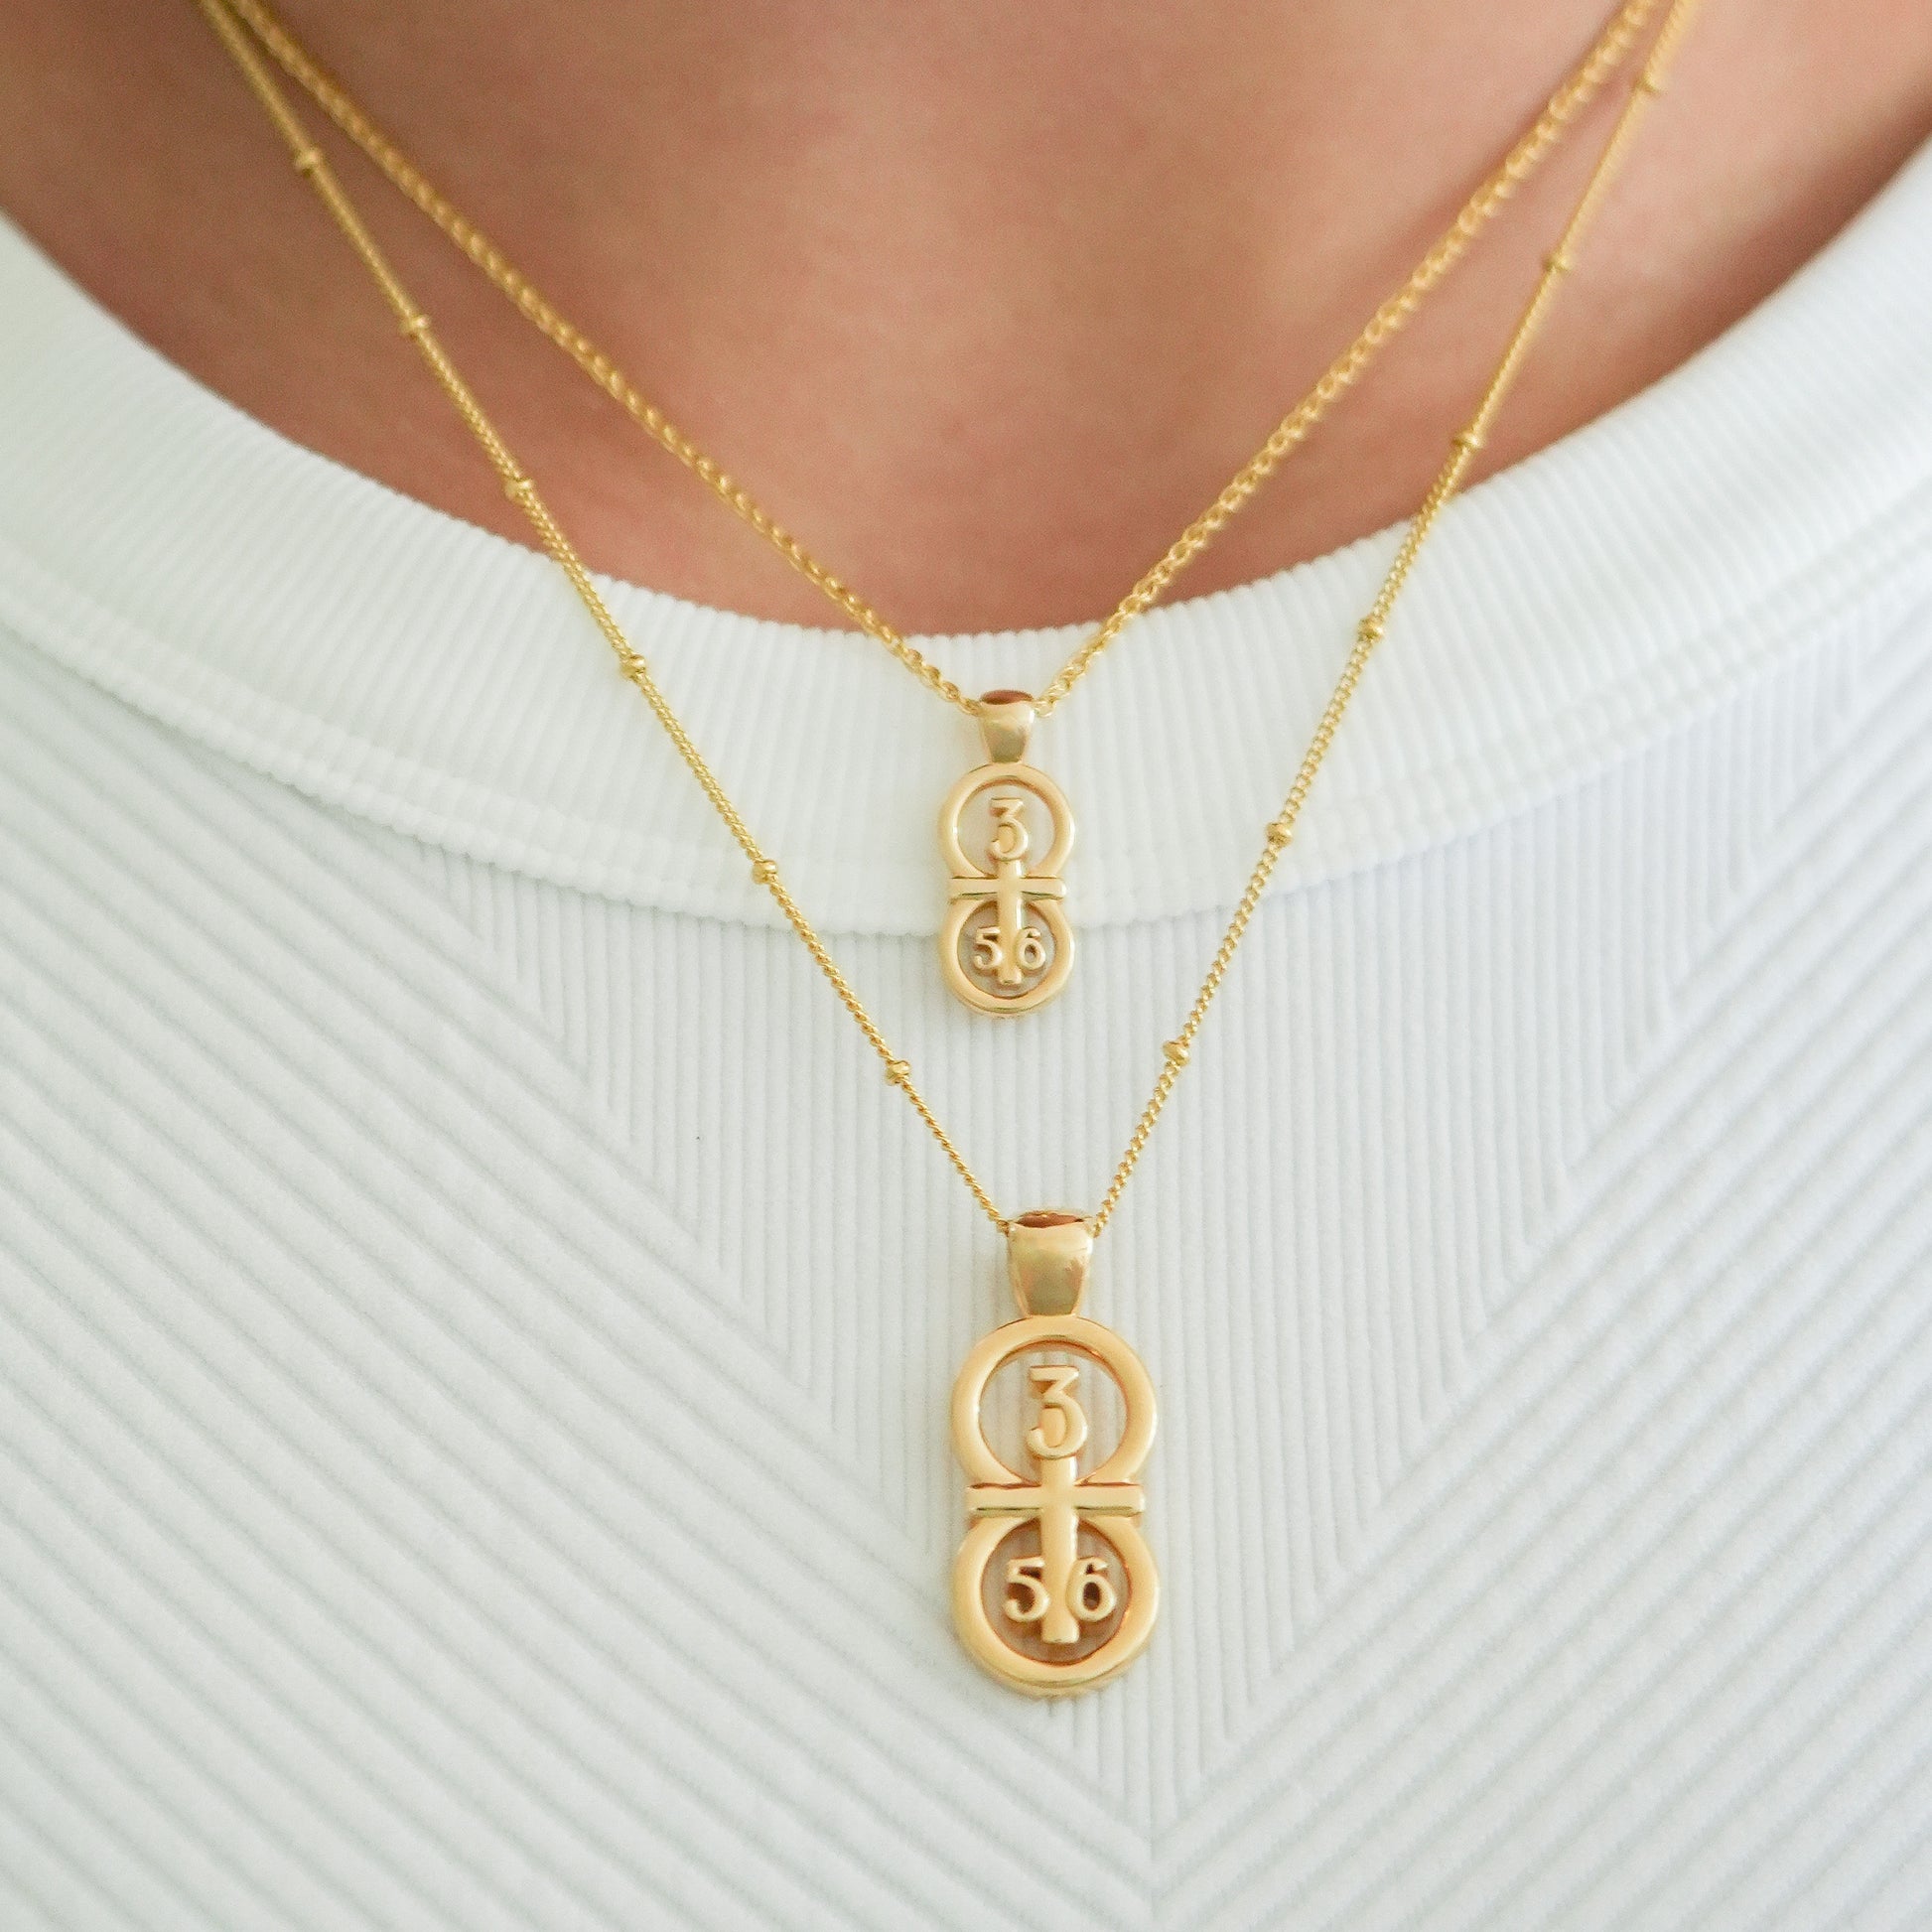 Gold small and large pendants displayed on the neck with this wheat chain and satellite chain on the larger pendant.  Our 29 and 11® pendant has the numbers 3, 5, and 6 intertwined with the cross to represent Proverbs 3:5-6 with the chapter word "Proverbs" inscribed on the back.